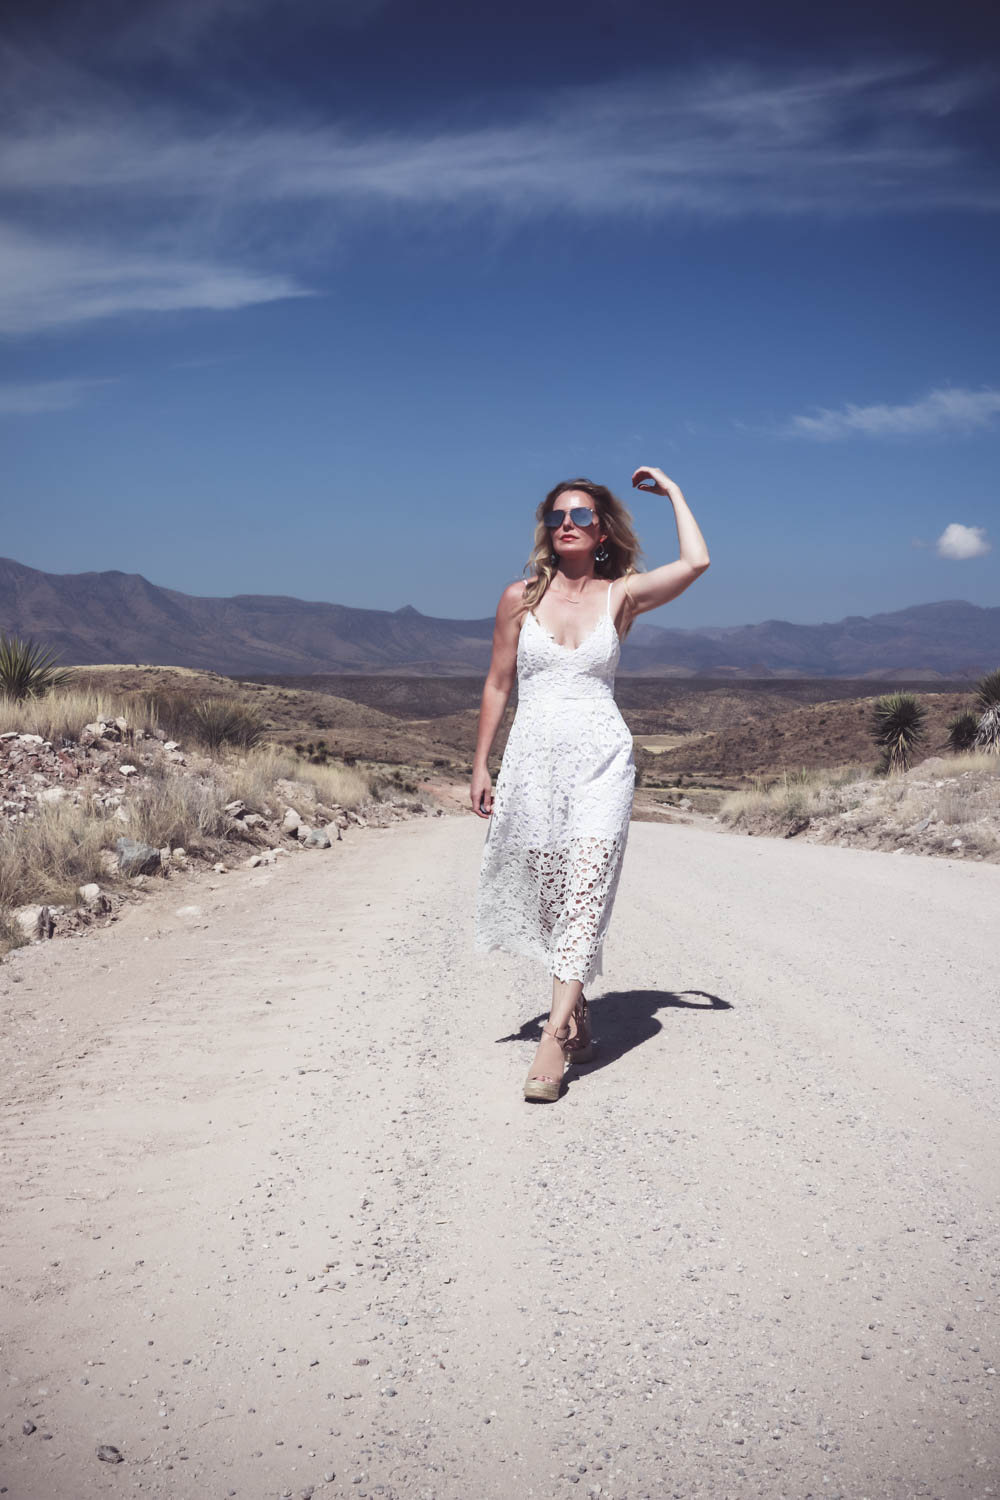 White lace dress on a desert dirt road in West Texas with Marc Fisher espadrilles in nude